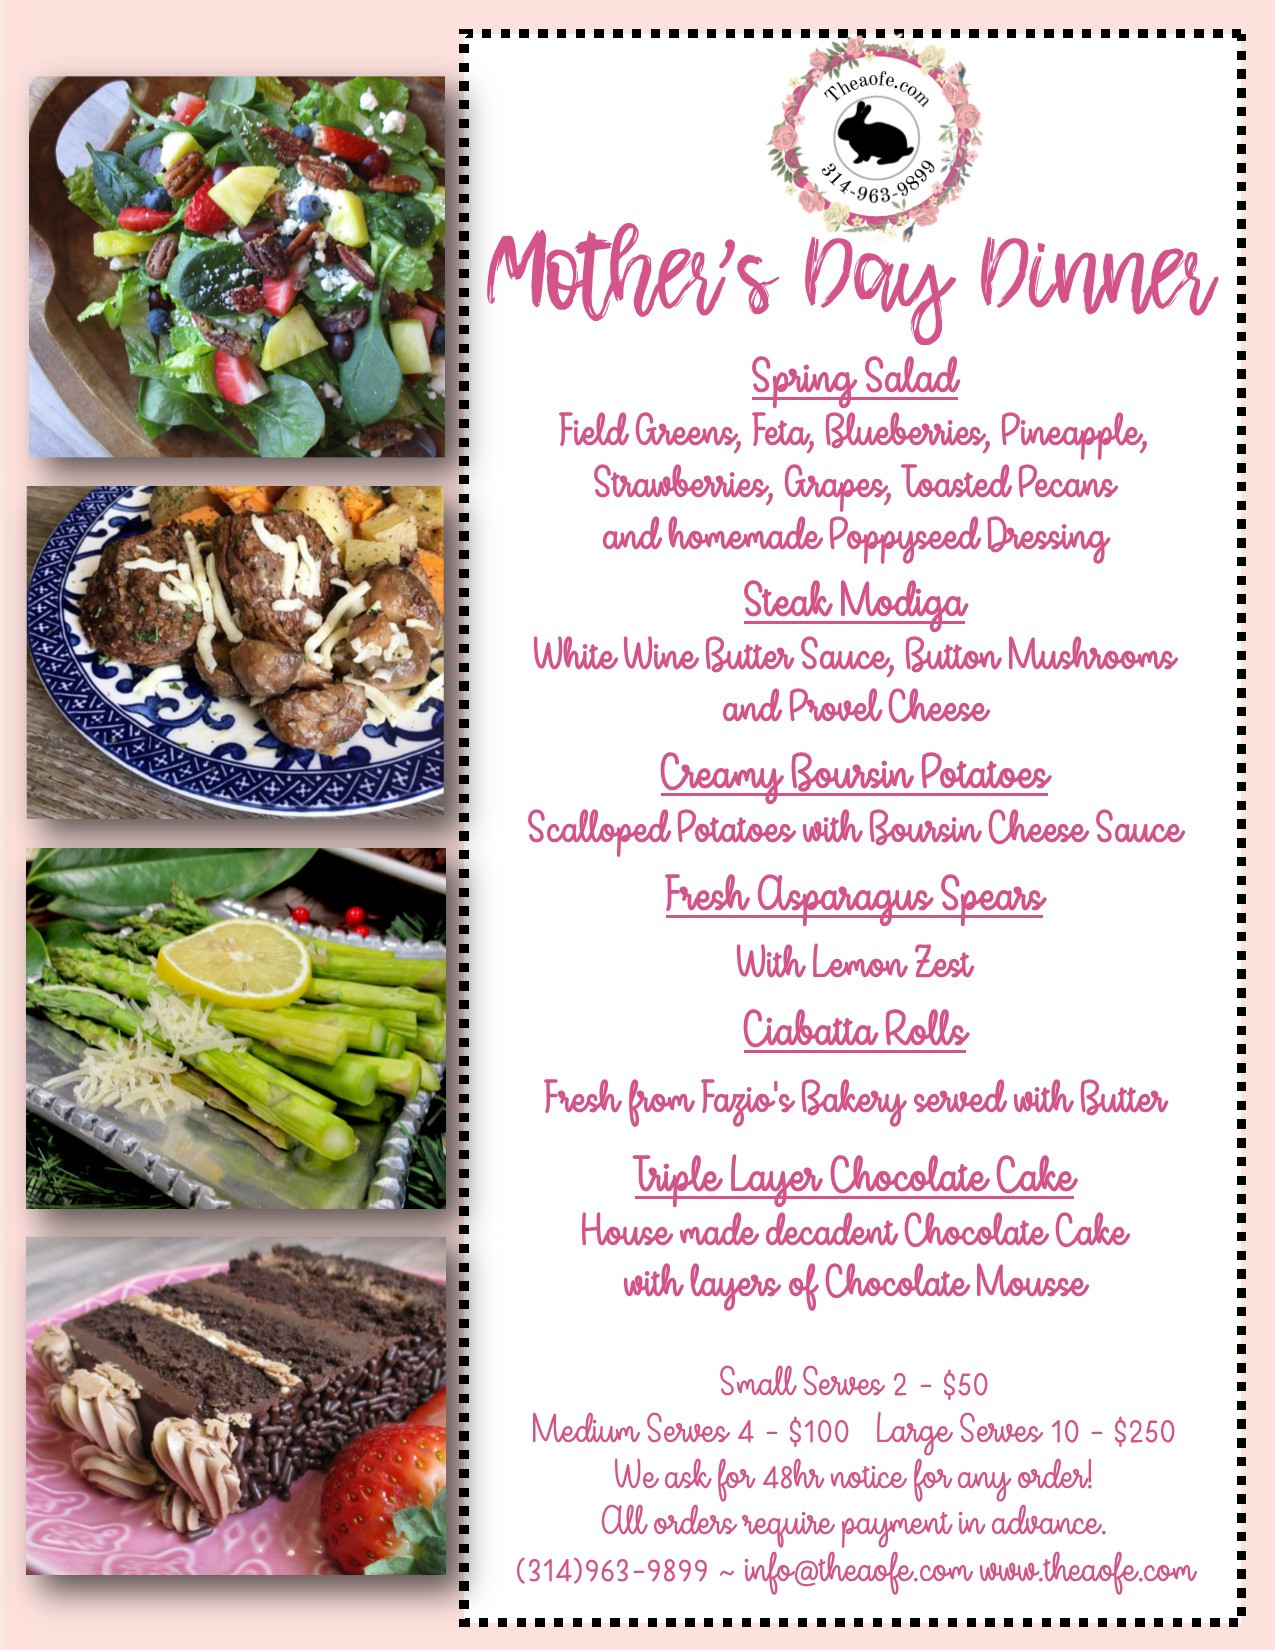 20 Best Mothers Day Dinner Restaurant - Best Recipes Ideas and Collections